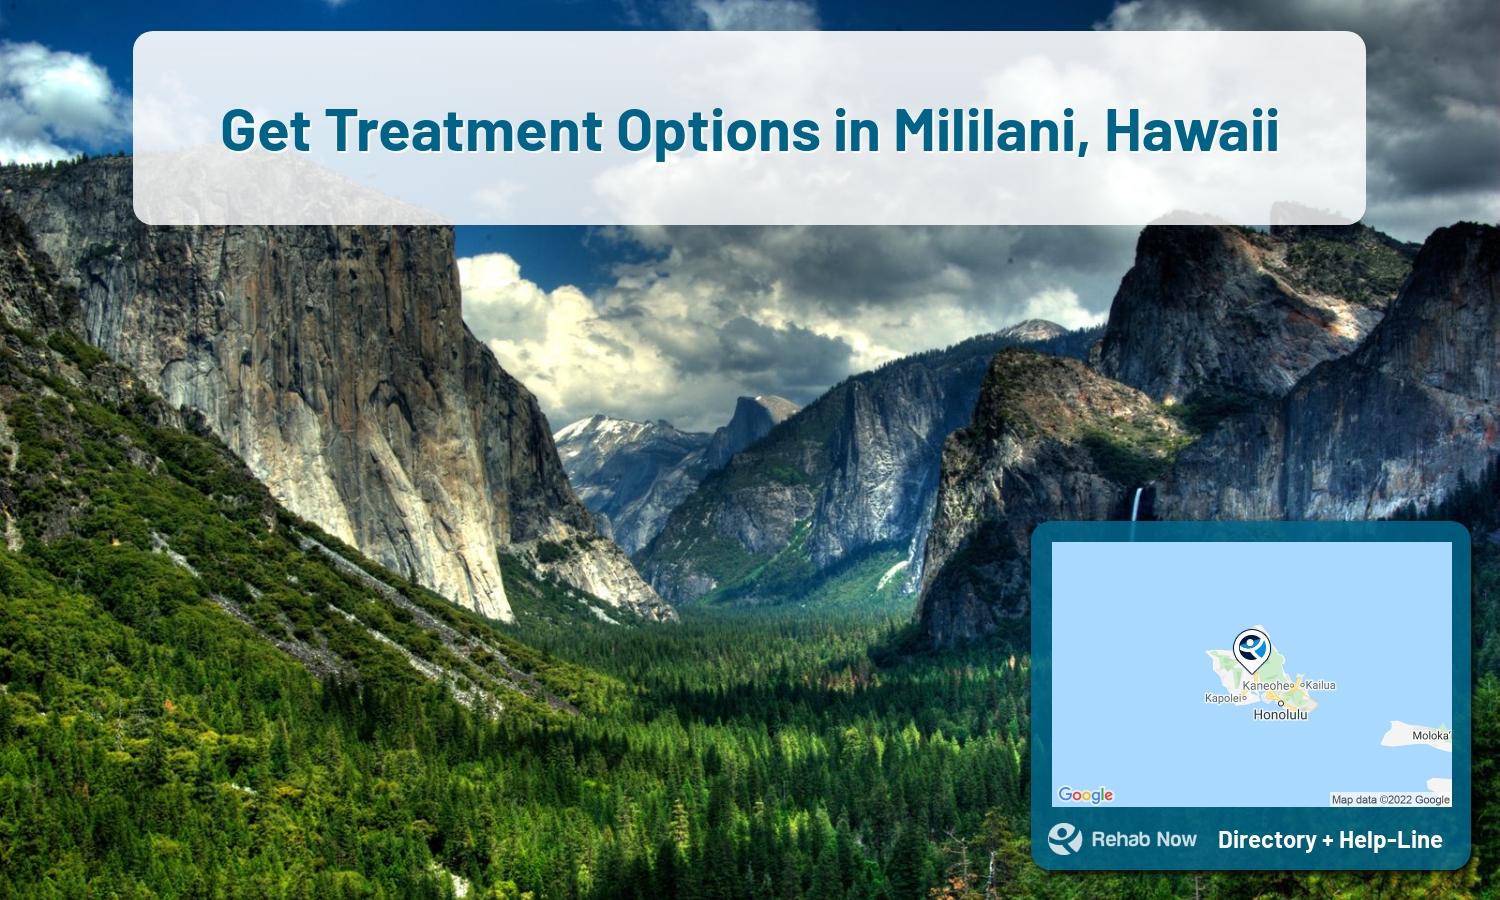 Mililani, HI Treatment Centers. Find drug rehab in Mililani, Hawaii, or detox and treatment programs. Get the right help now!